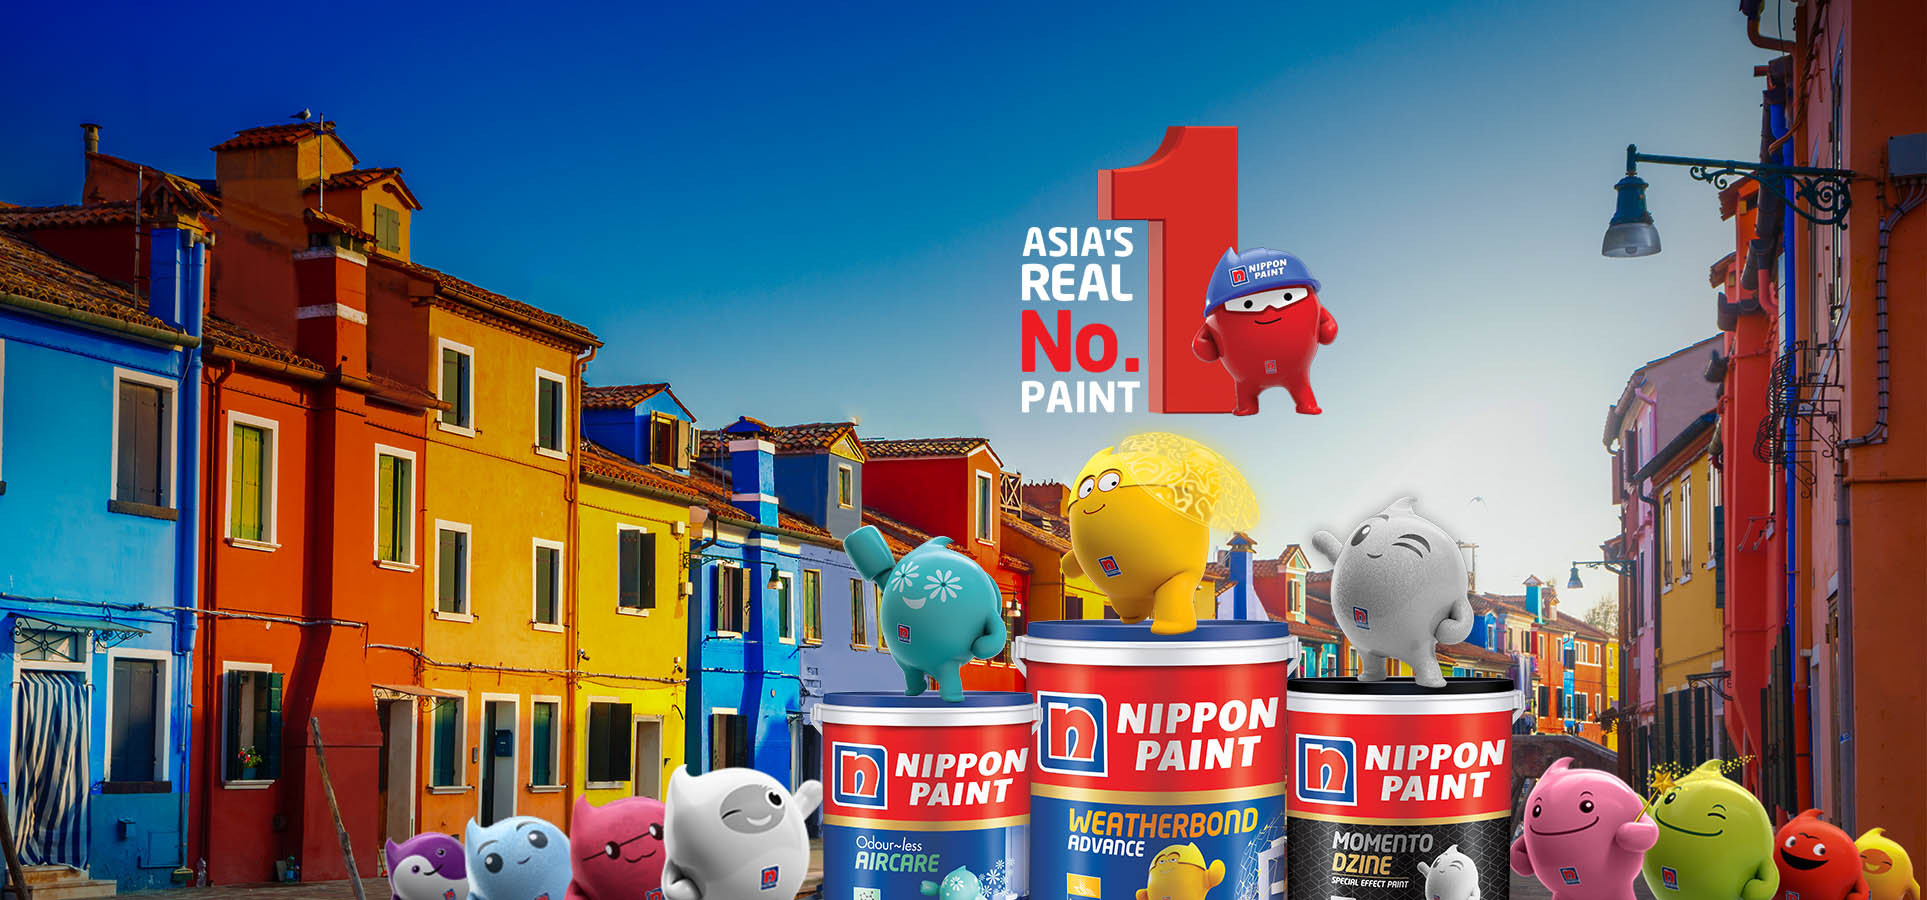  Nippon  Paint  India Asia s Real No 1 Paint 